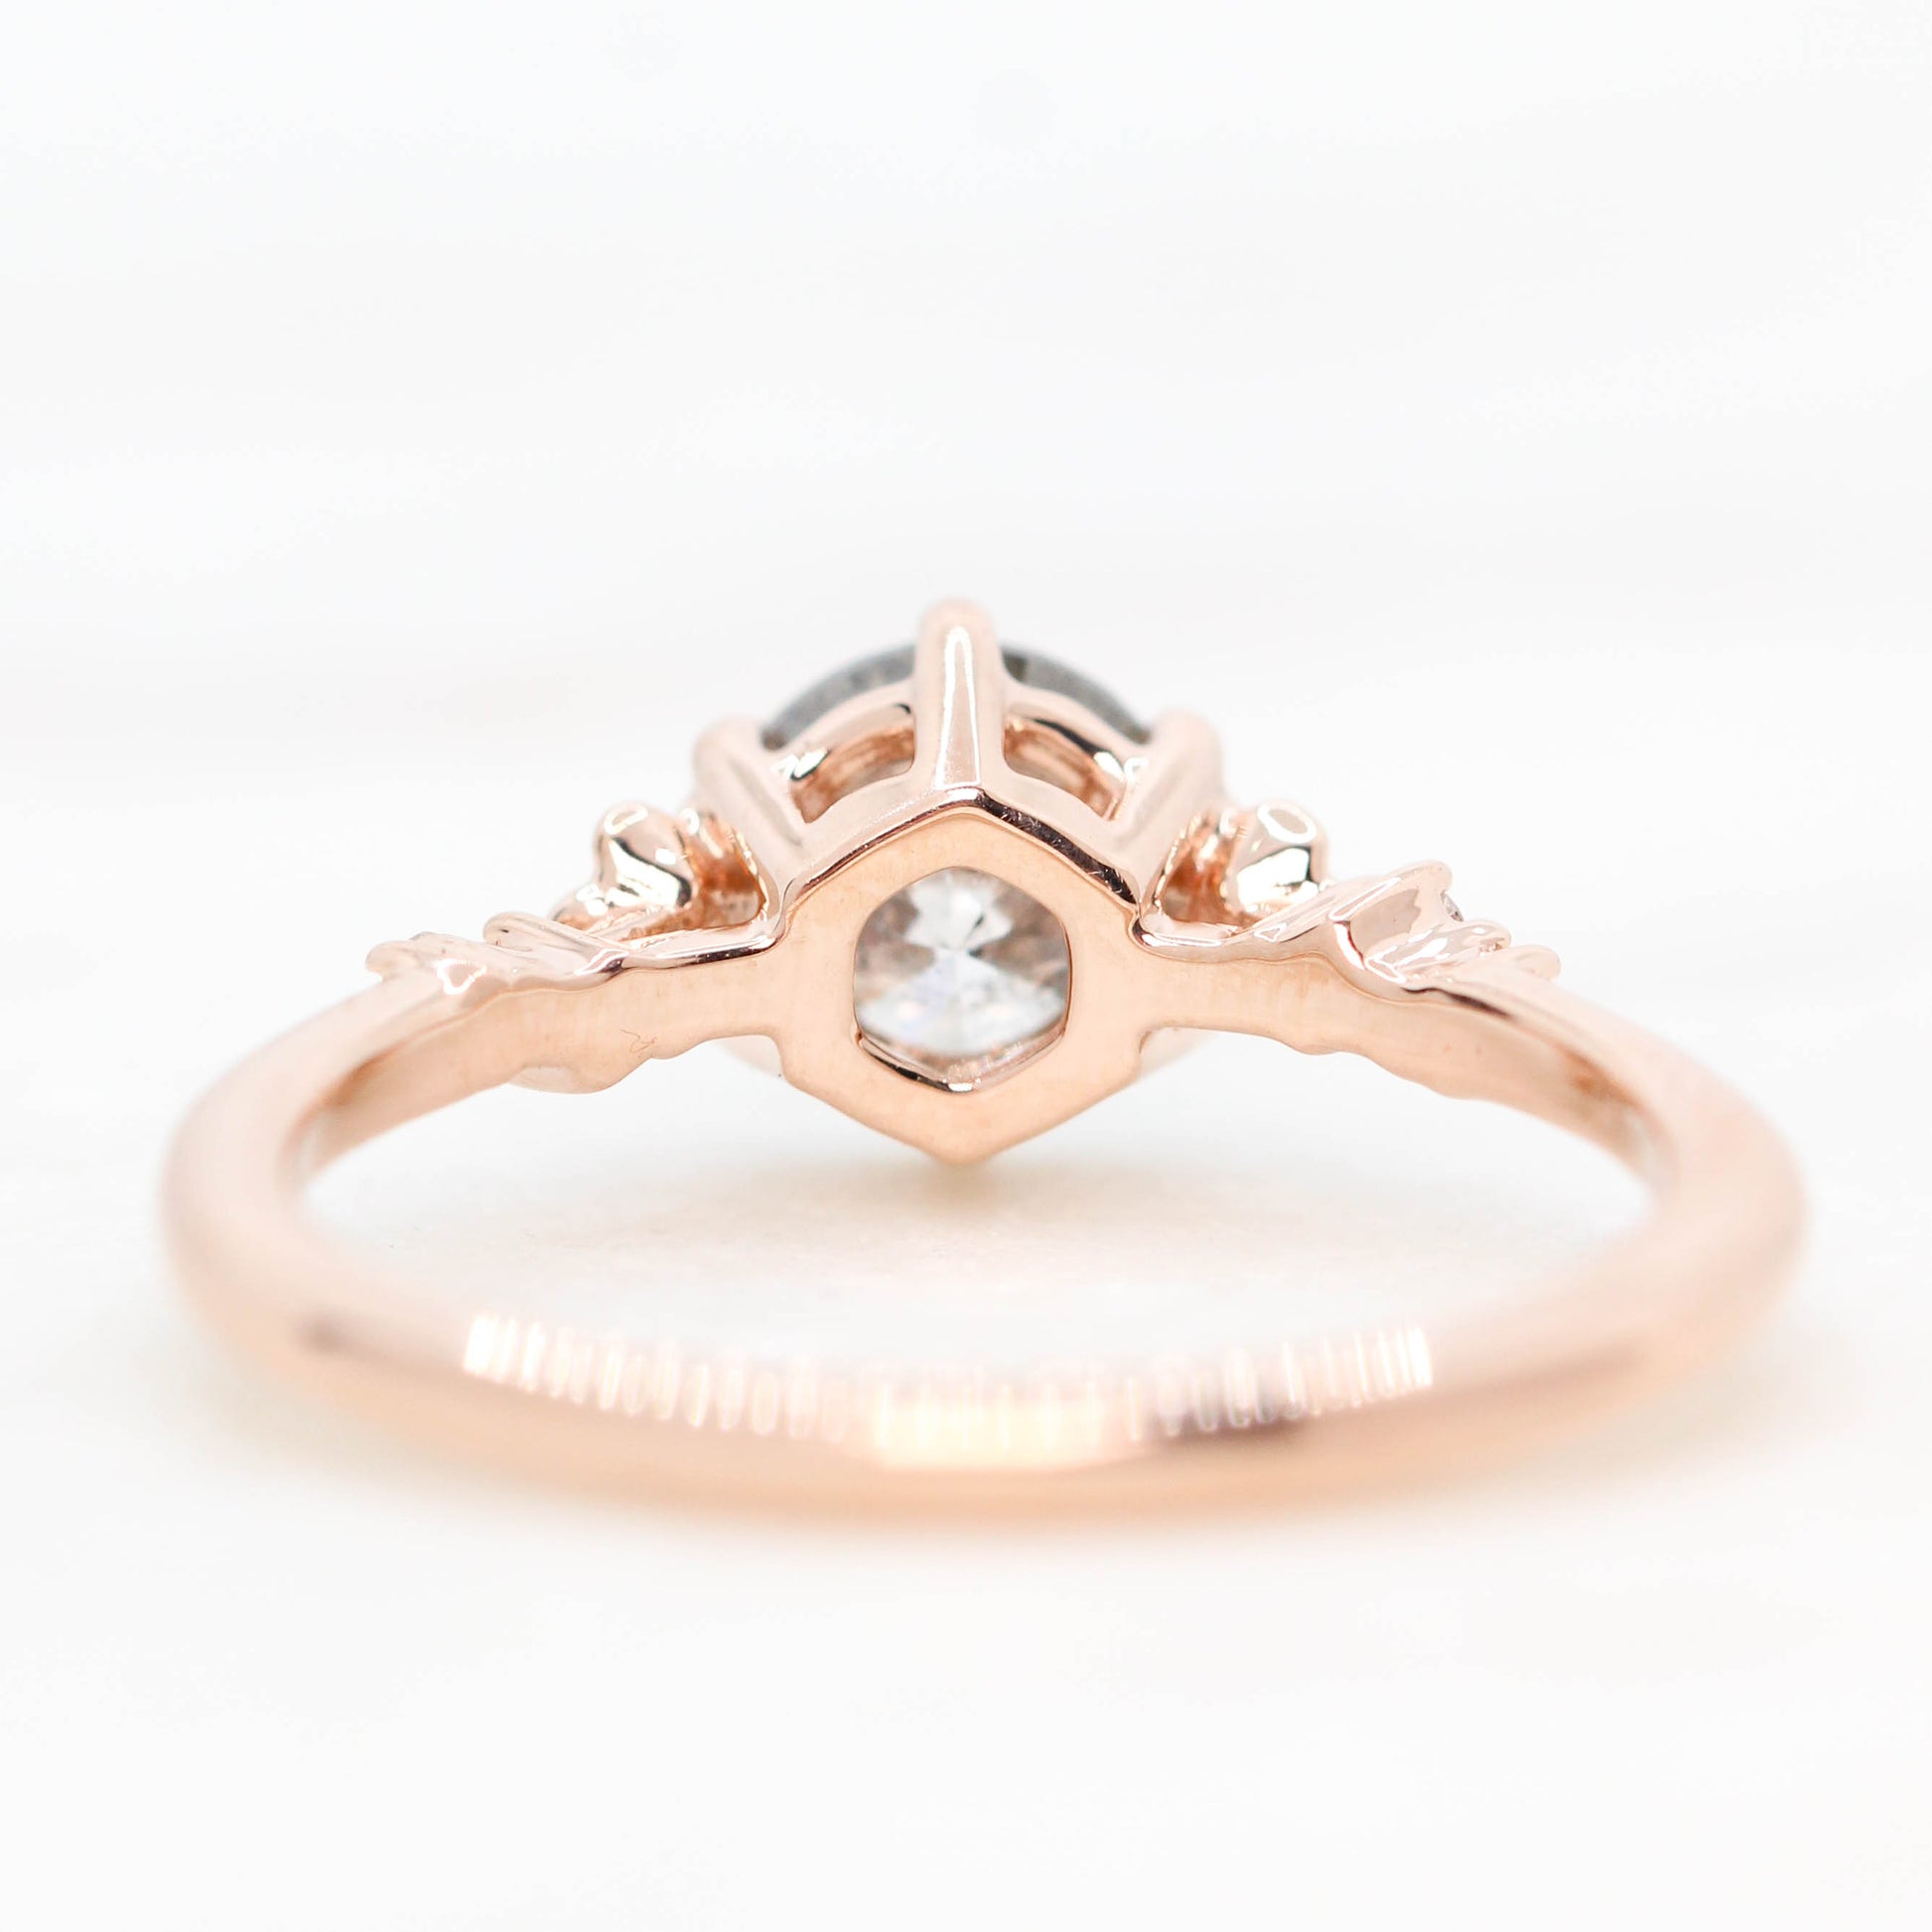 Meadow Ring with a 1.12 Carat Round Gray Salt and Pepper Diamond with White Accent Diamonds in 14k Rose Gold - Ready to Size and Ship - Midwinter Co. Alternative Bridal Rings and Modern Fine Jewelry